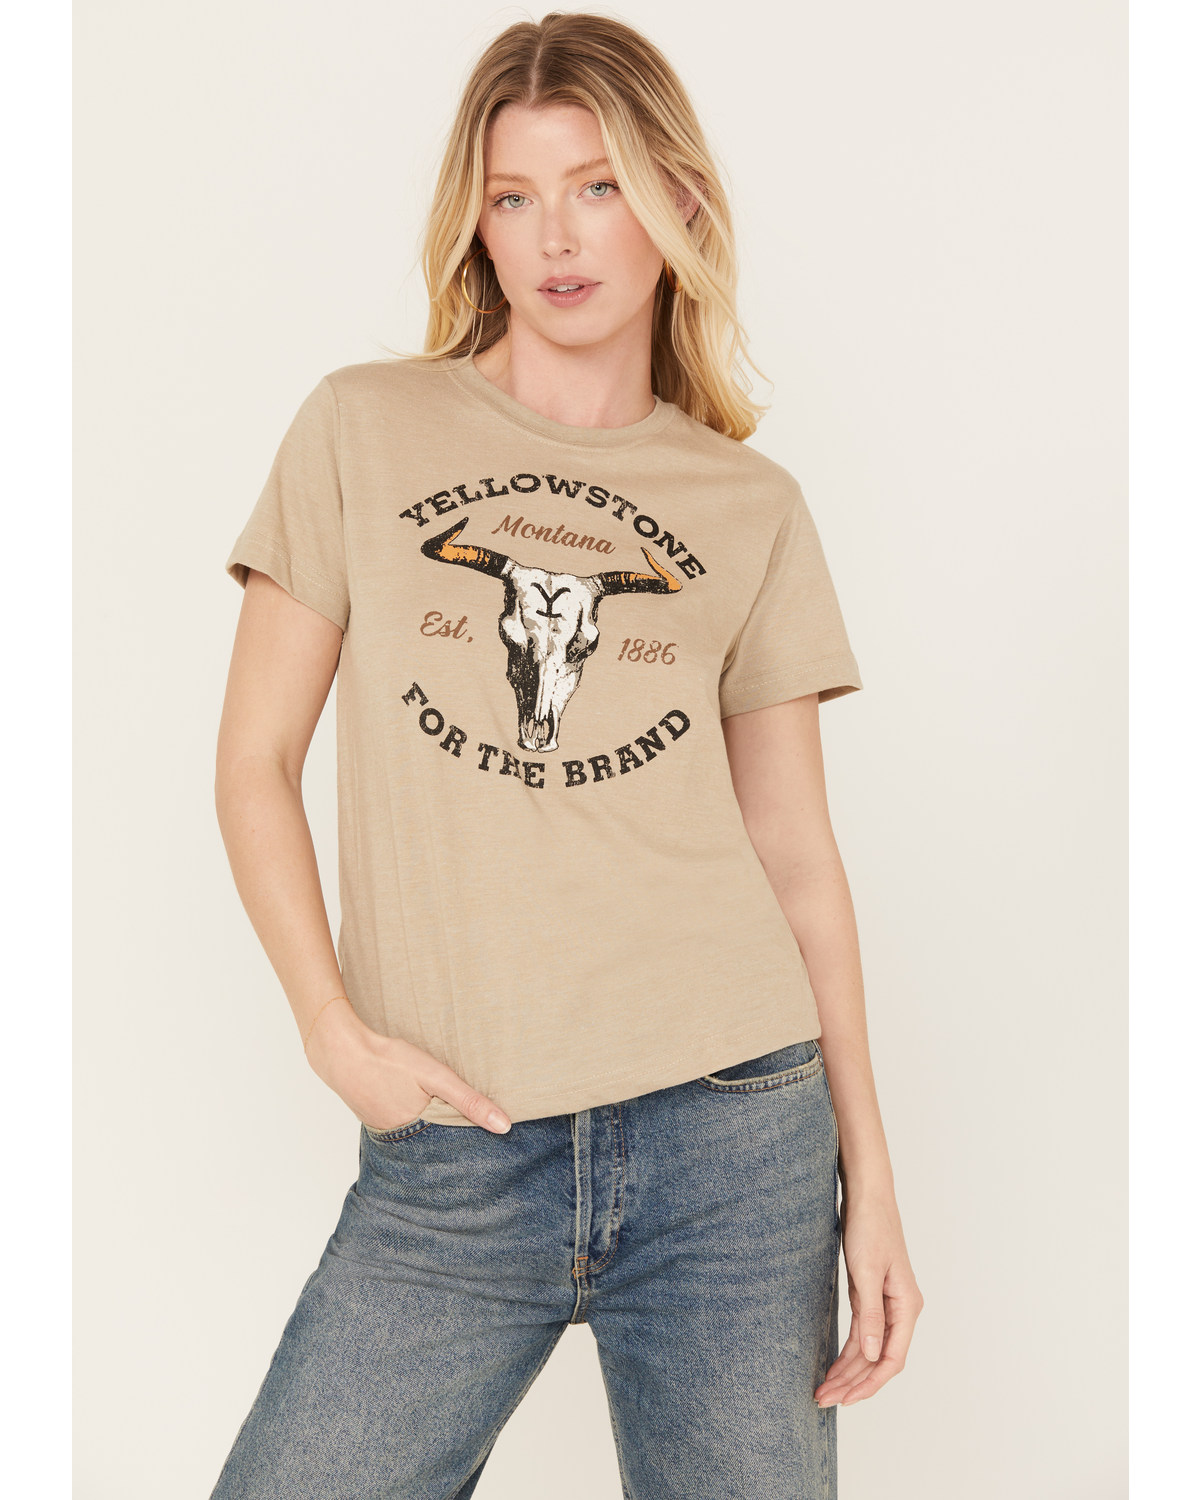 Changes Women's Yellowstone Dutton Ranch Short Sleeve Graphic Tee